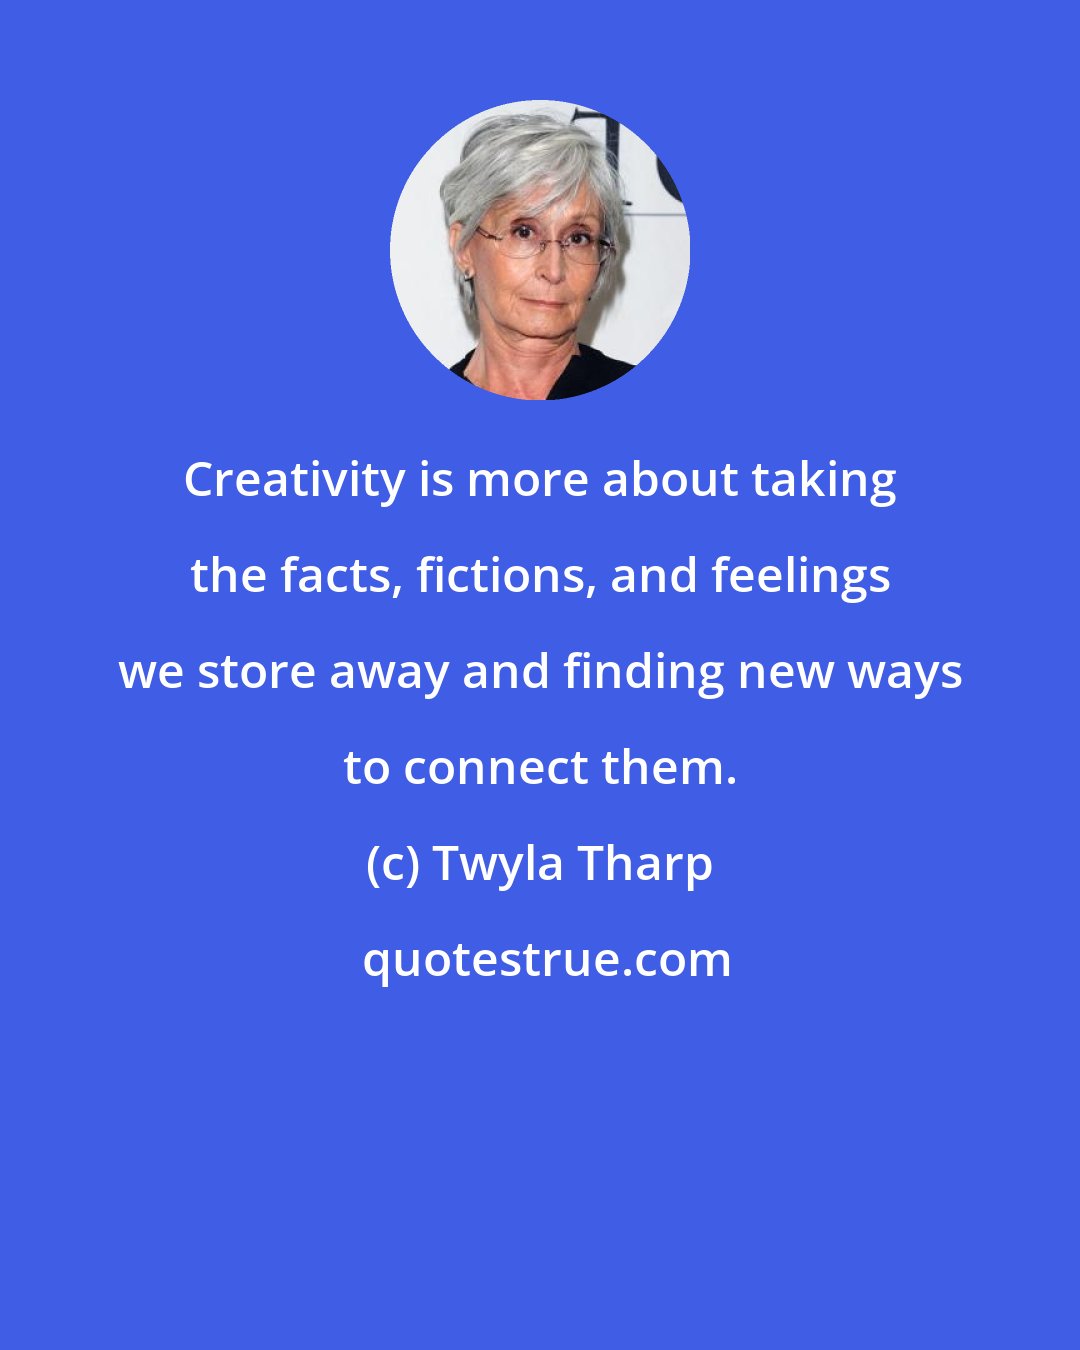 Twyla Tharp: Creativity is more about taking the facts, fictions, and feelings we store away and finding new ways to connect them.